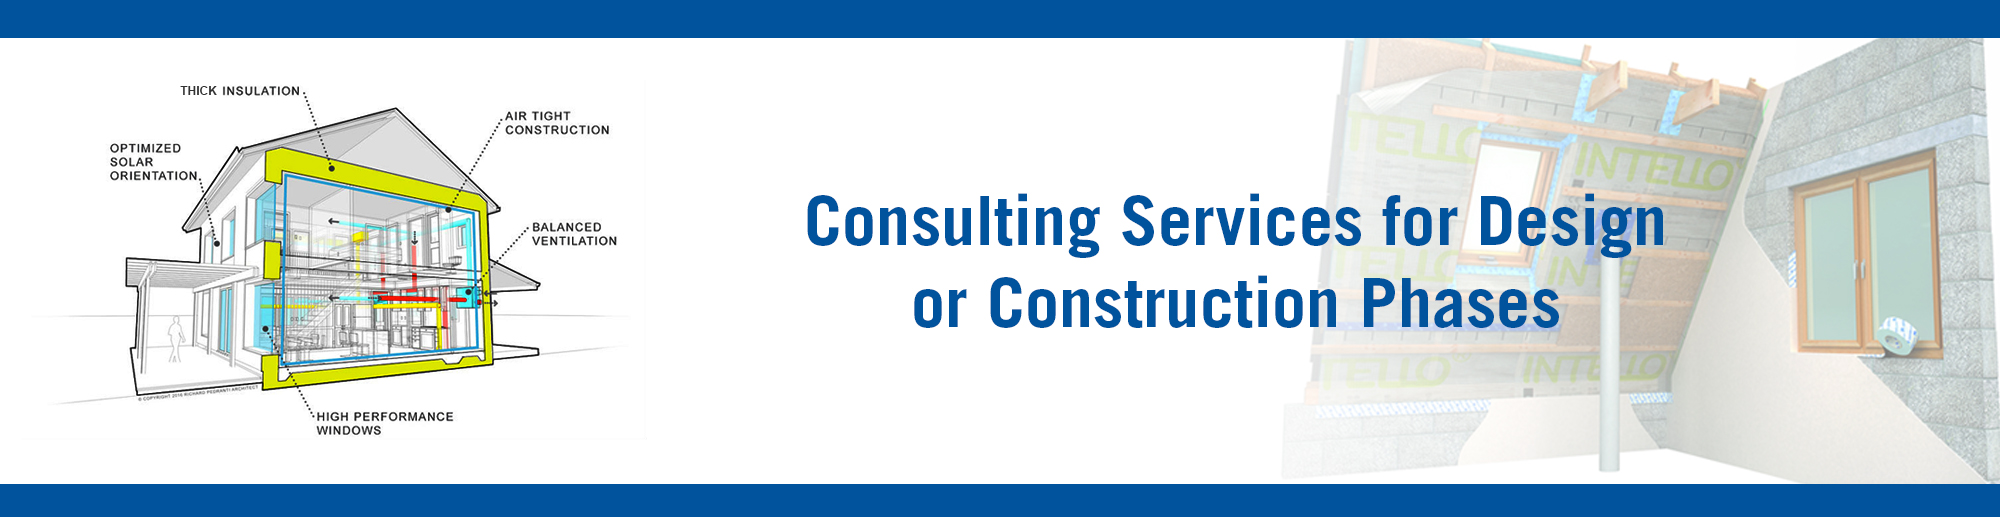 consulting services2